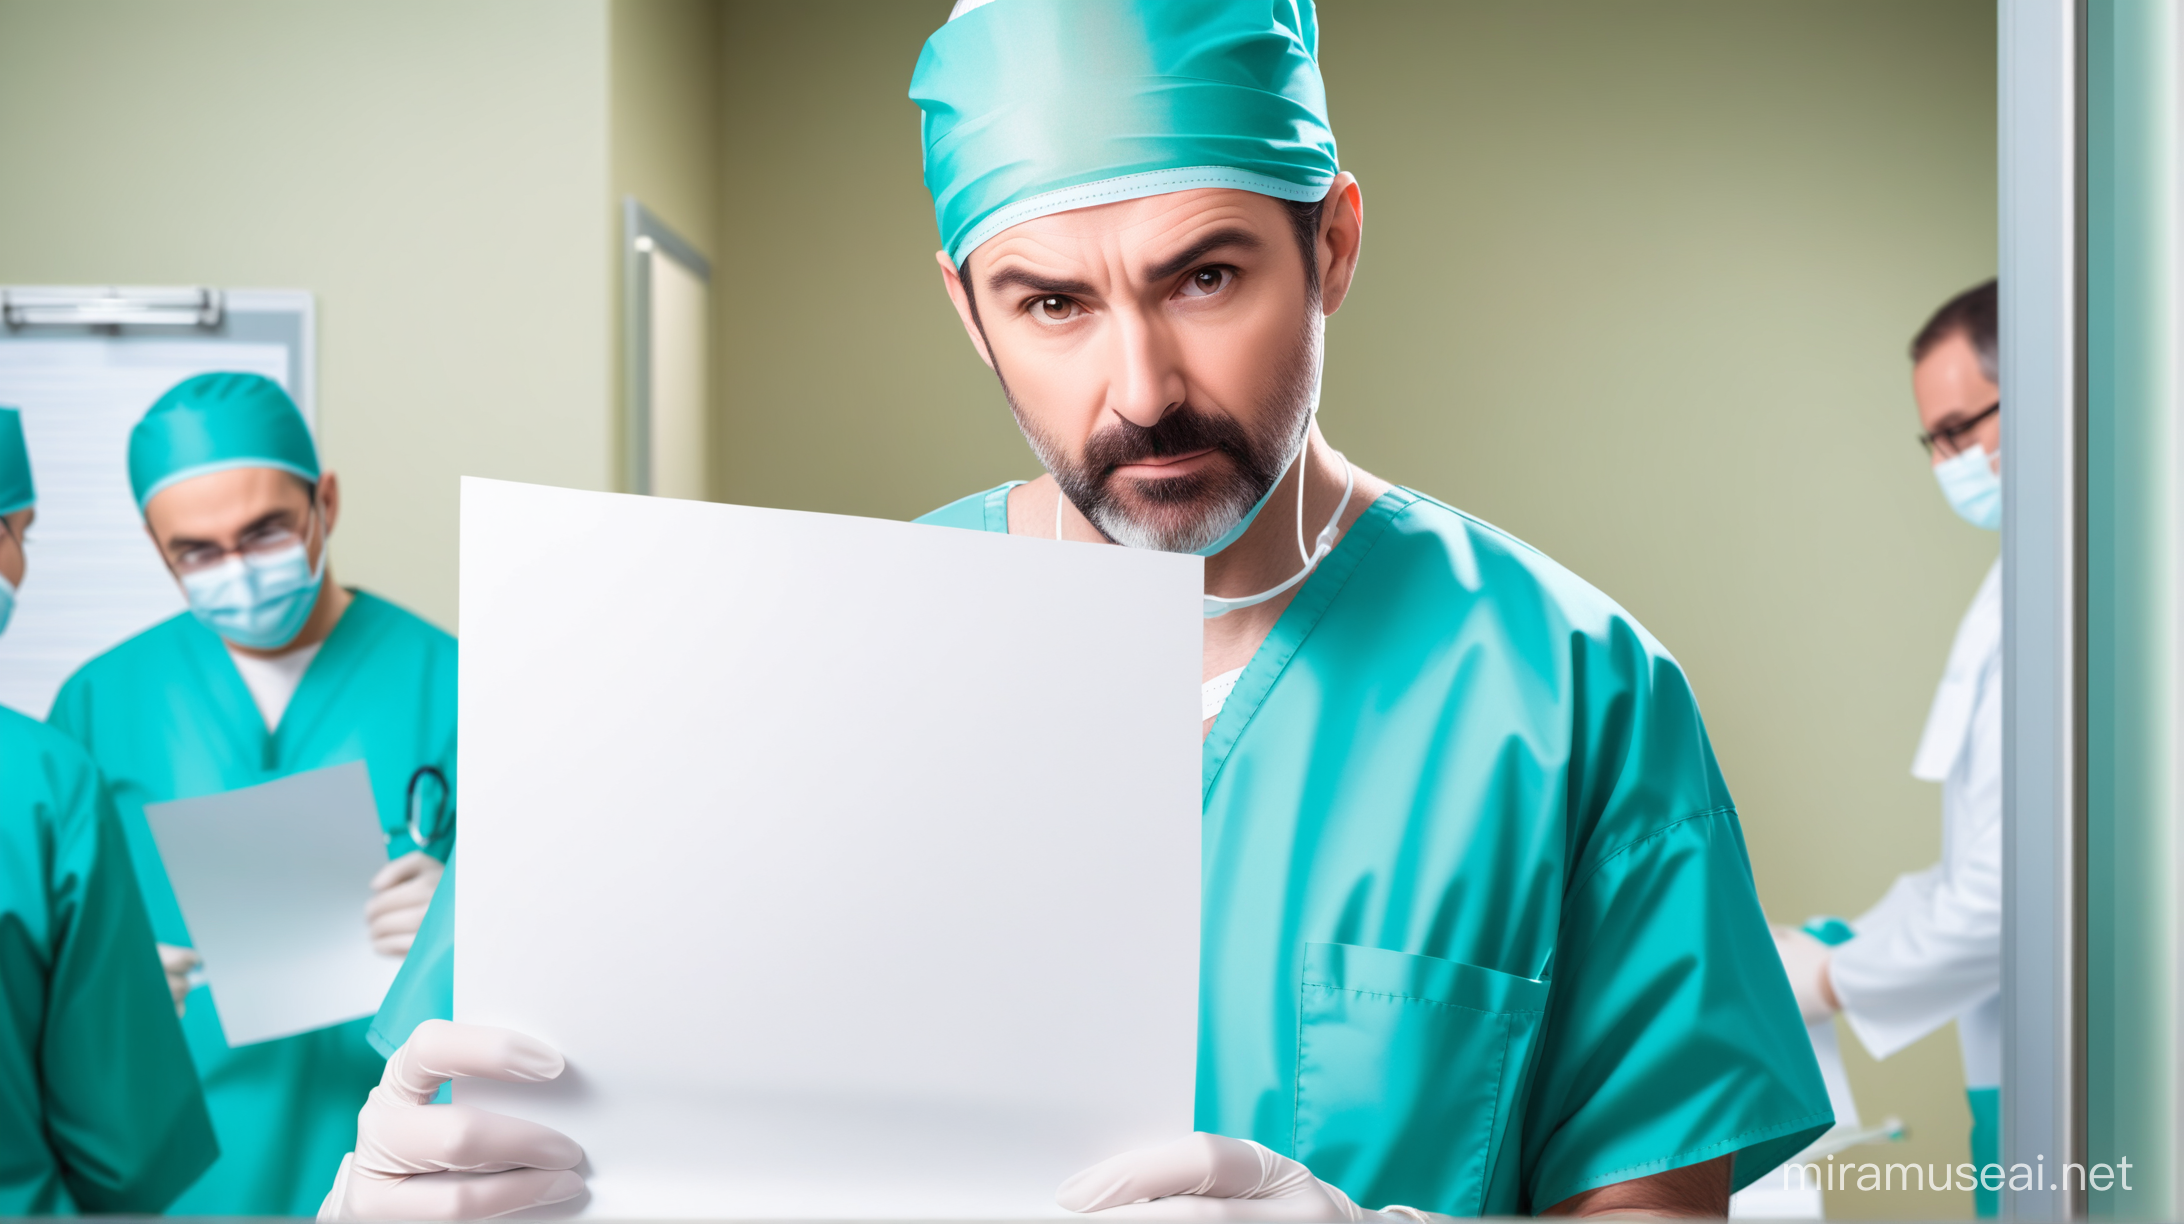 Anxious MiddleAged Surgeon Holding White Paper